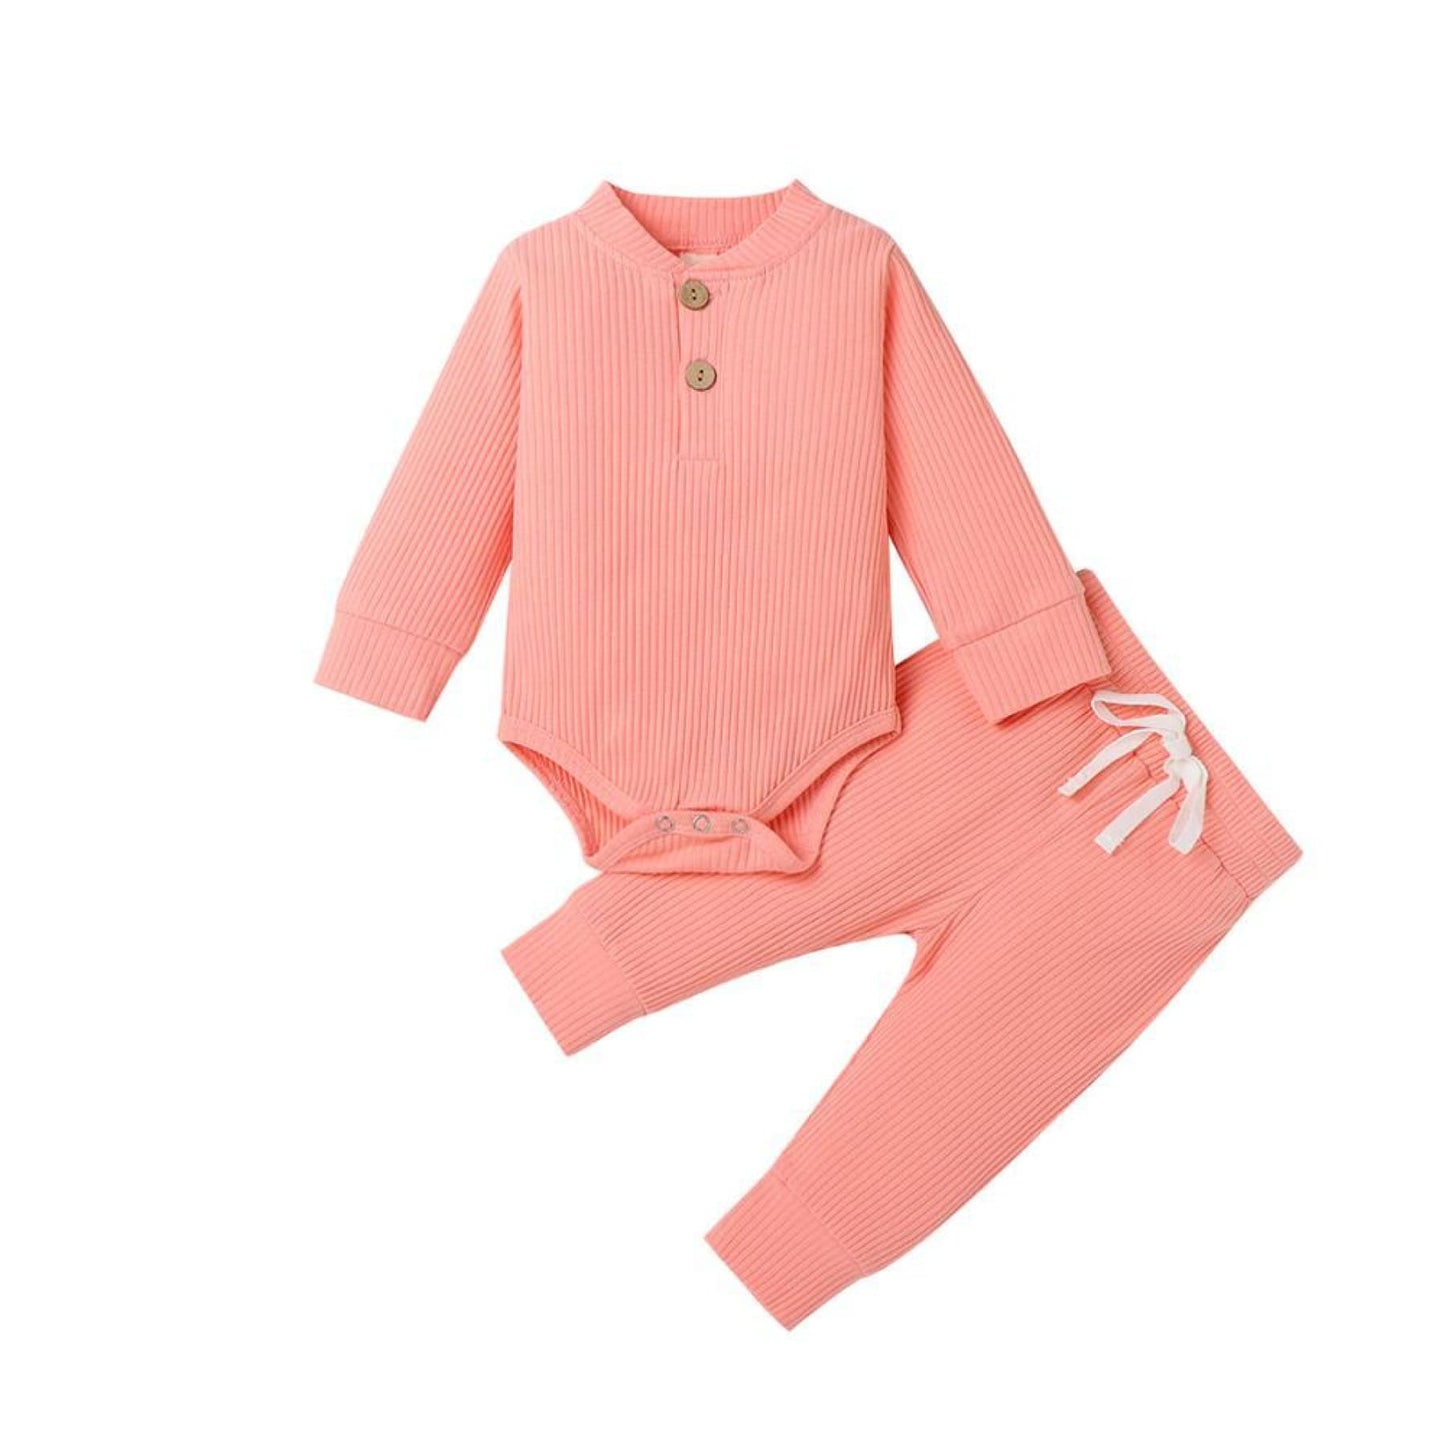 Pink baby track suit with romper or onesie and pants- Hunny Bubba Kids